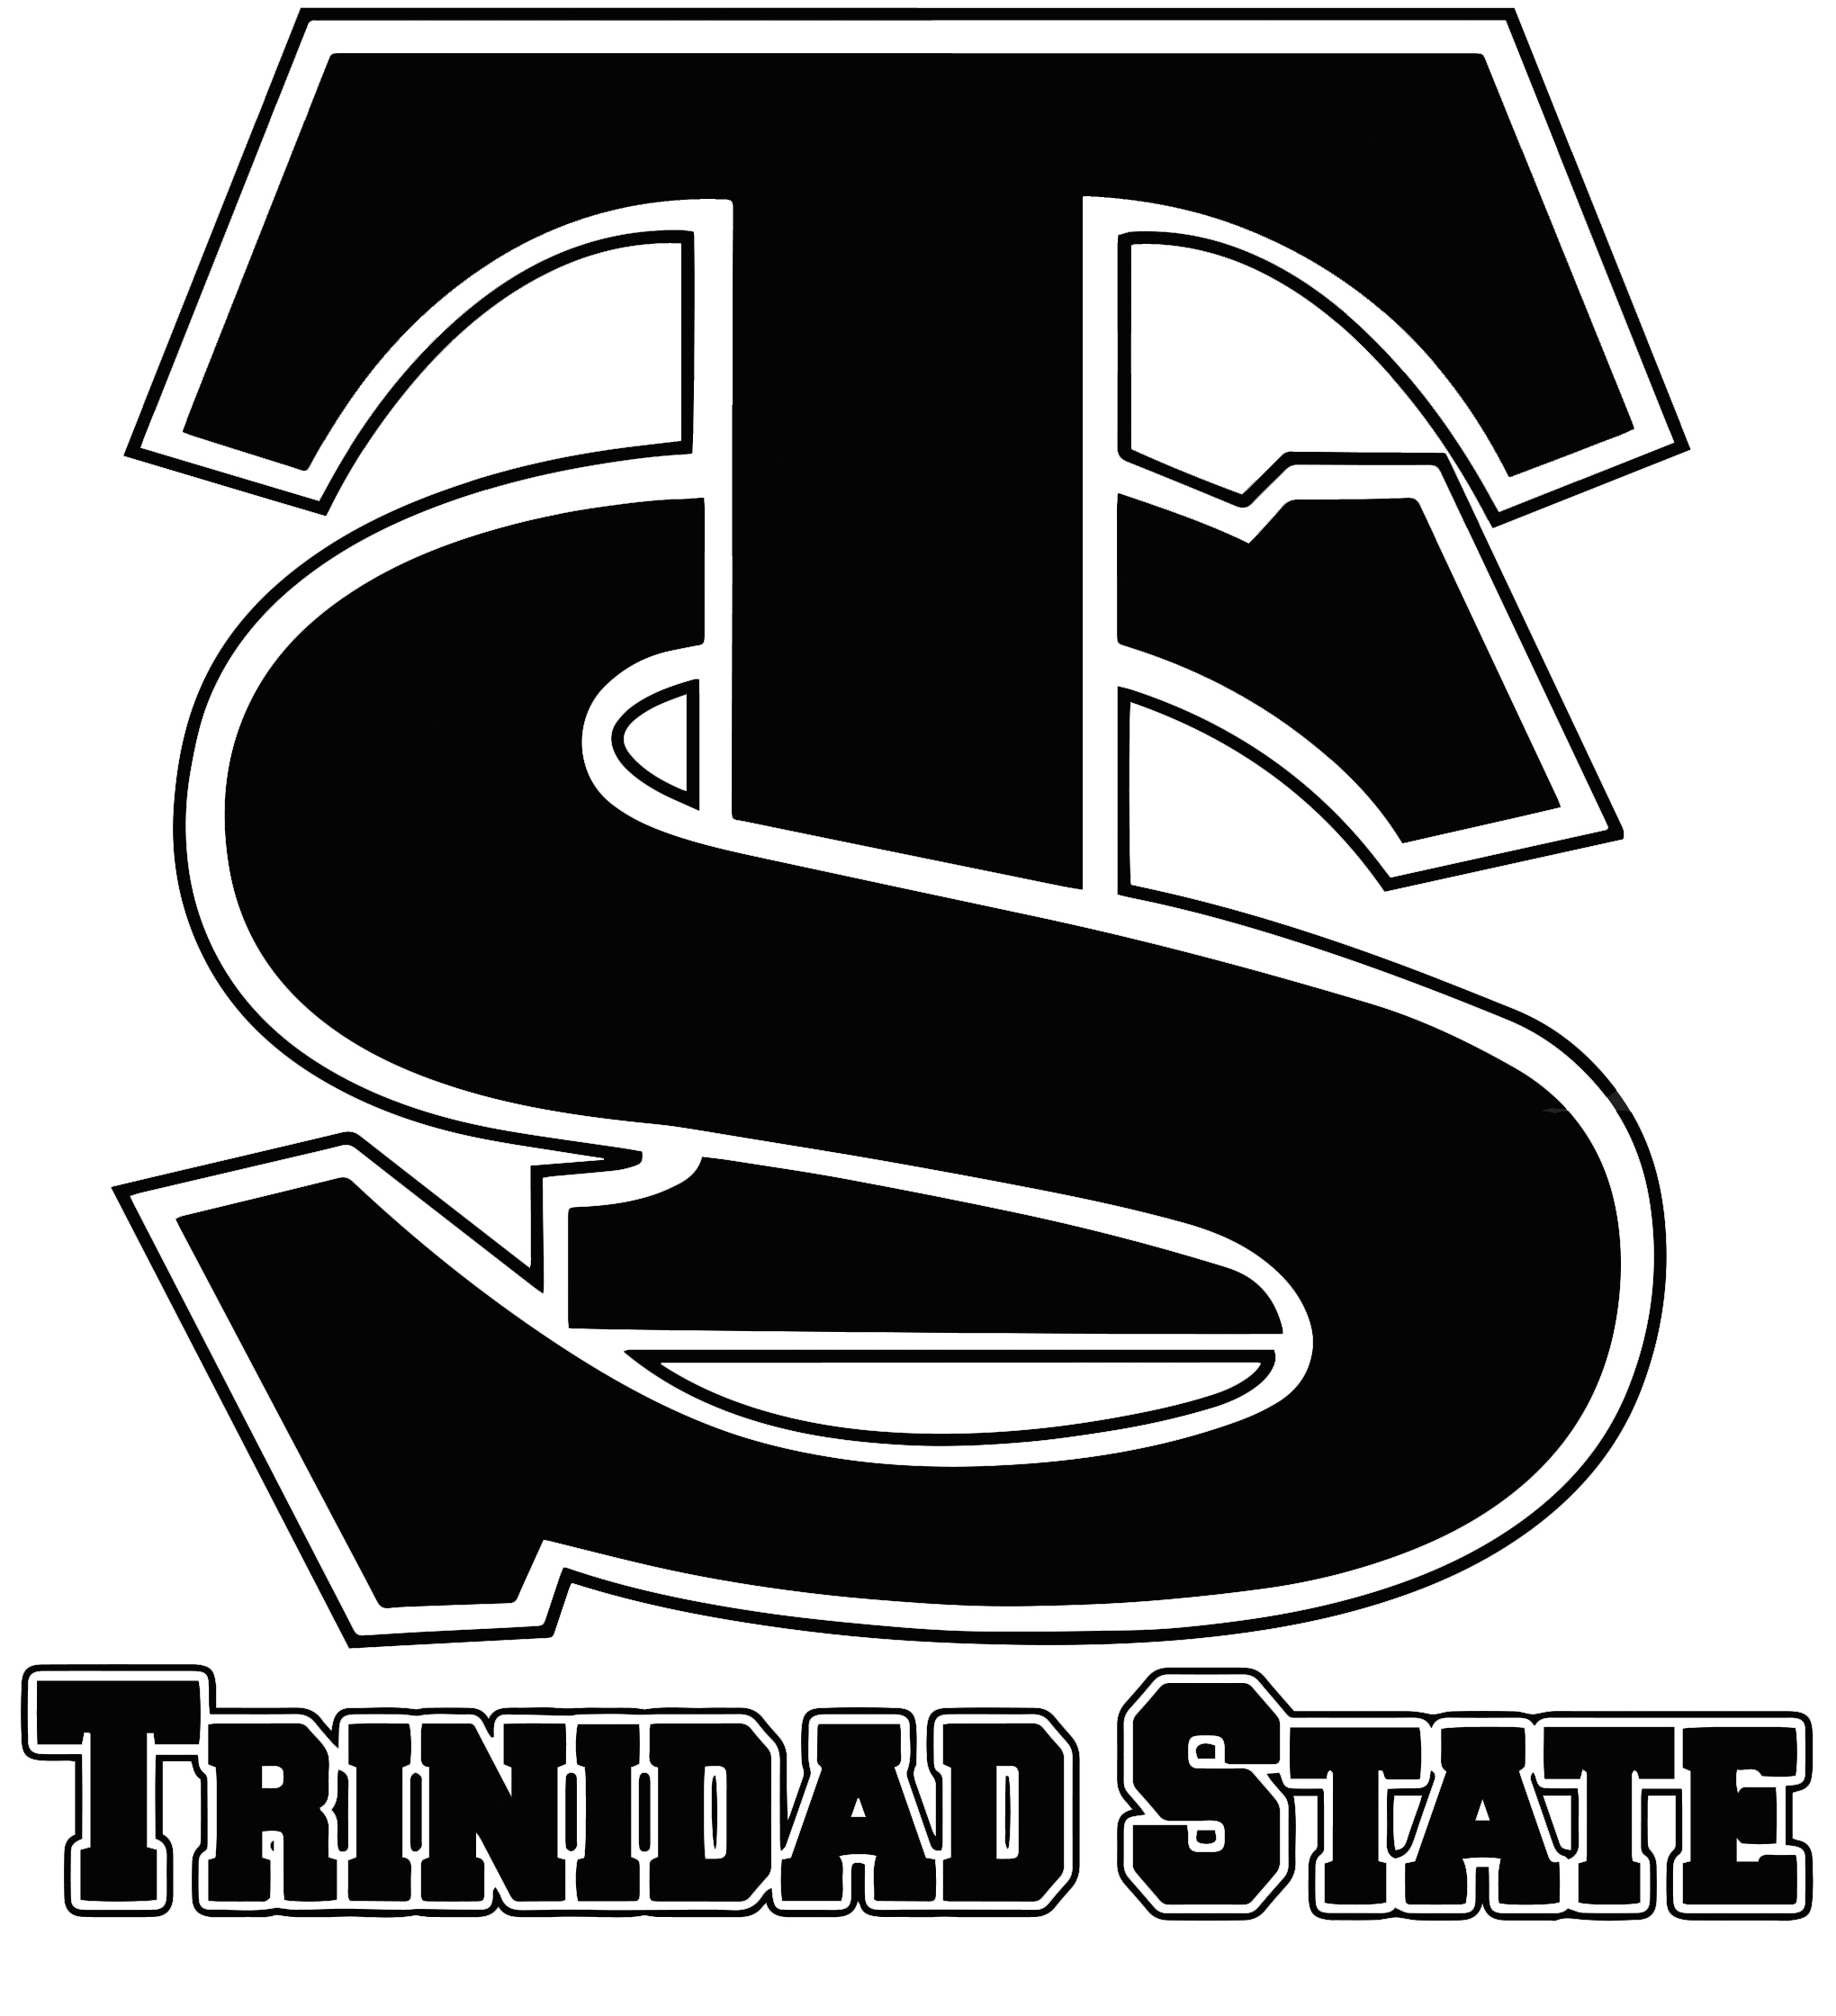 Trinidad State TS logo in Black and White image